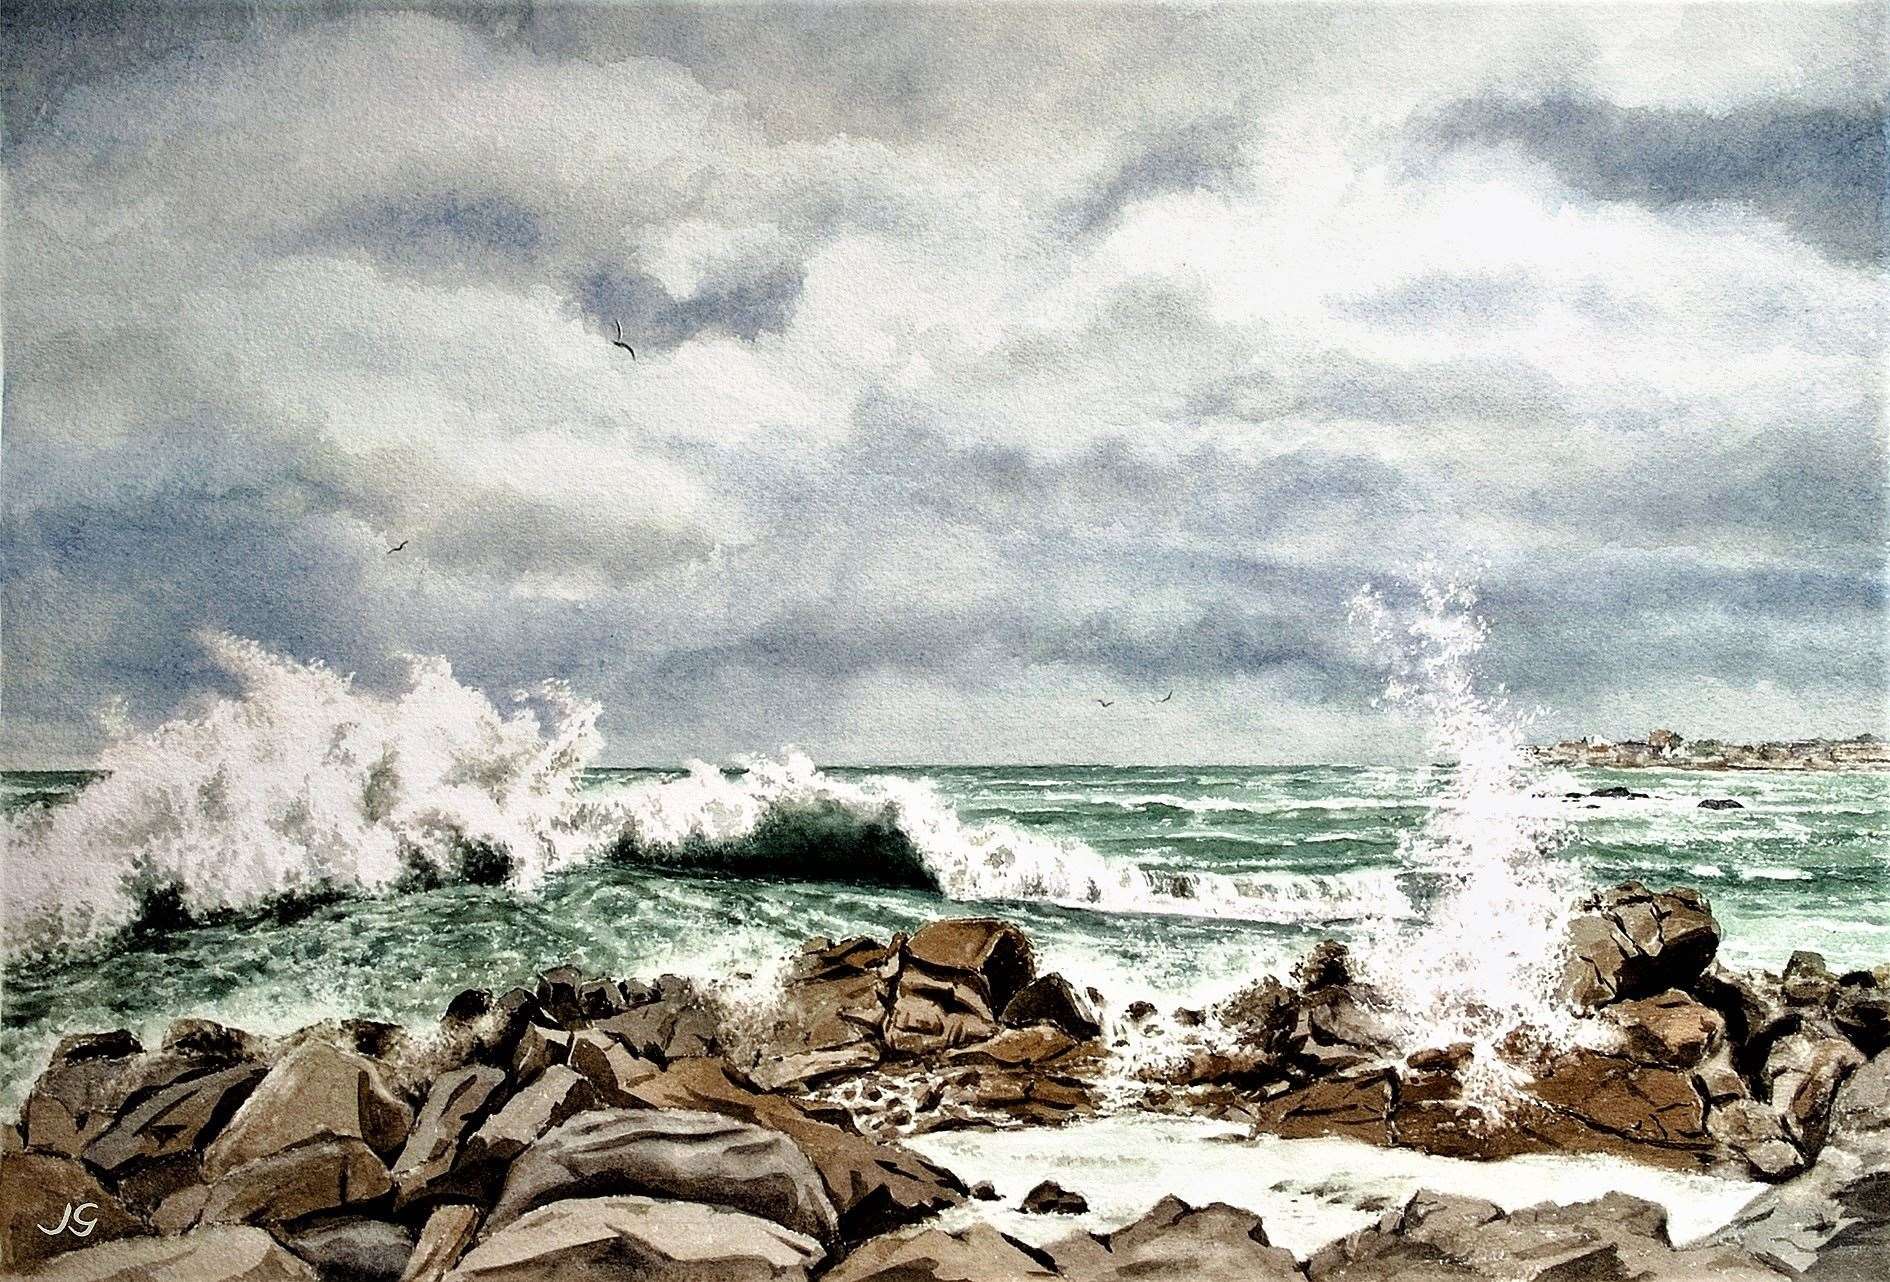 One of John Greene's own paintings shows a wild coastal scene and is called Winter Storm in Scotsman's Bay...